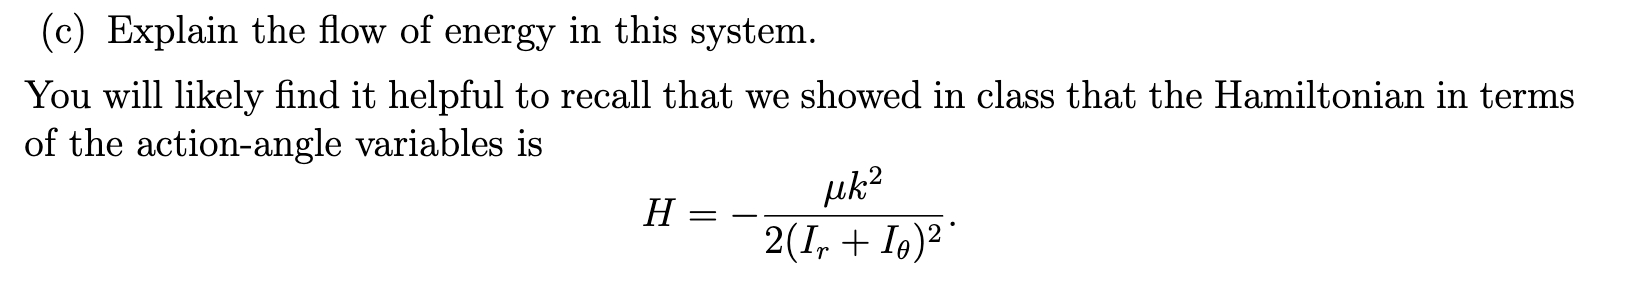 (c) Explain the flow of energy in this system. You will likely find it helpful to recall that we showed in